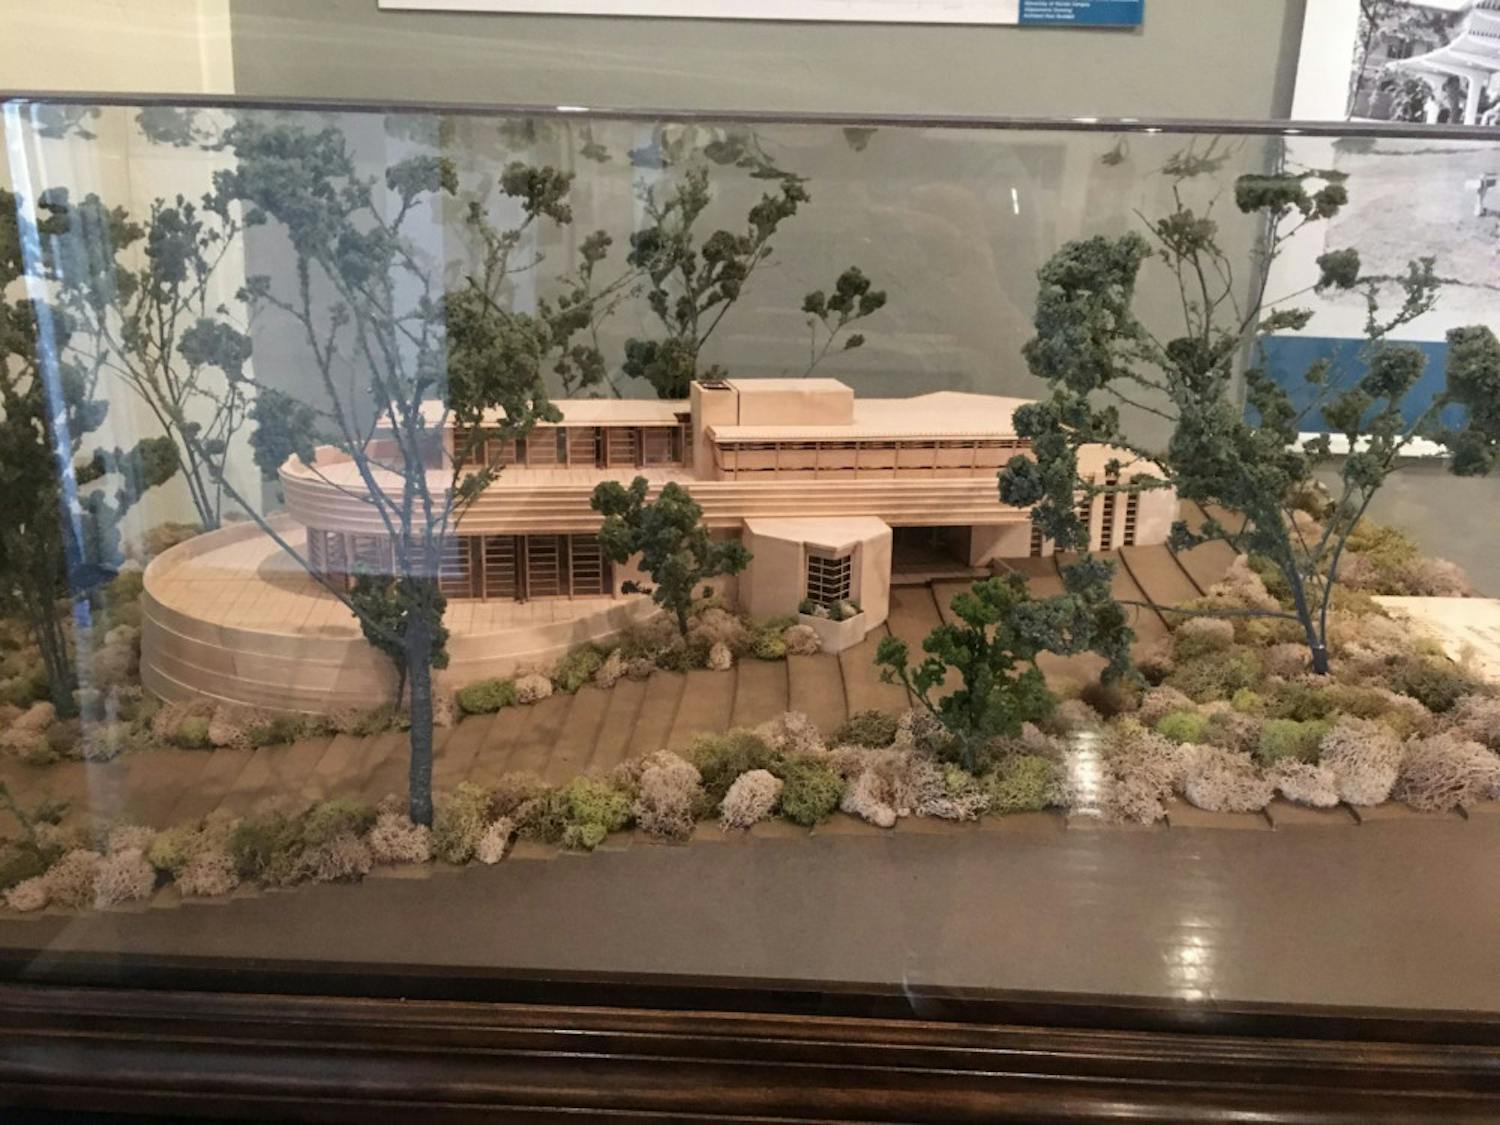 A model of the unbuilt Zeta Beta Tau Fraternity House designed by Frank Lloyd Wright. The design for the house was drawn in 1954 and followed the mid-century style, but due in part to code issues, the house was never built.&nbsp;